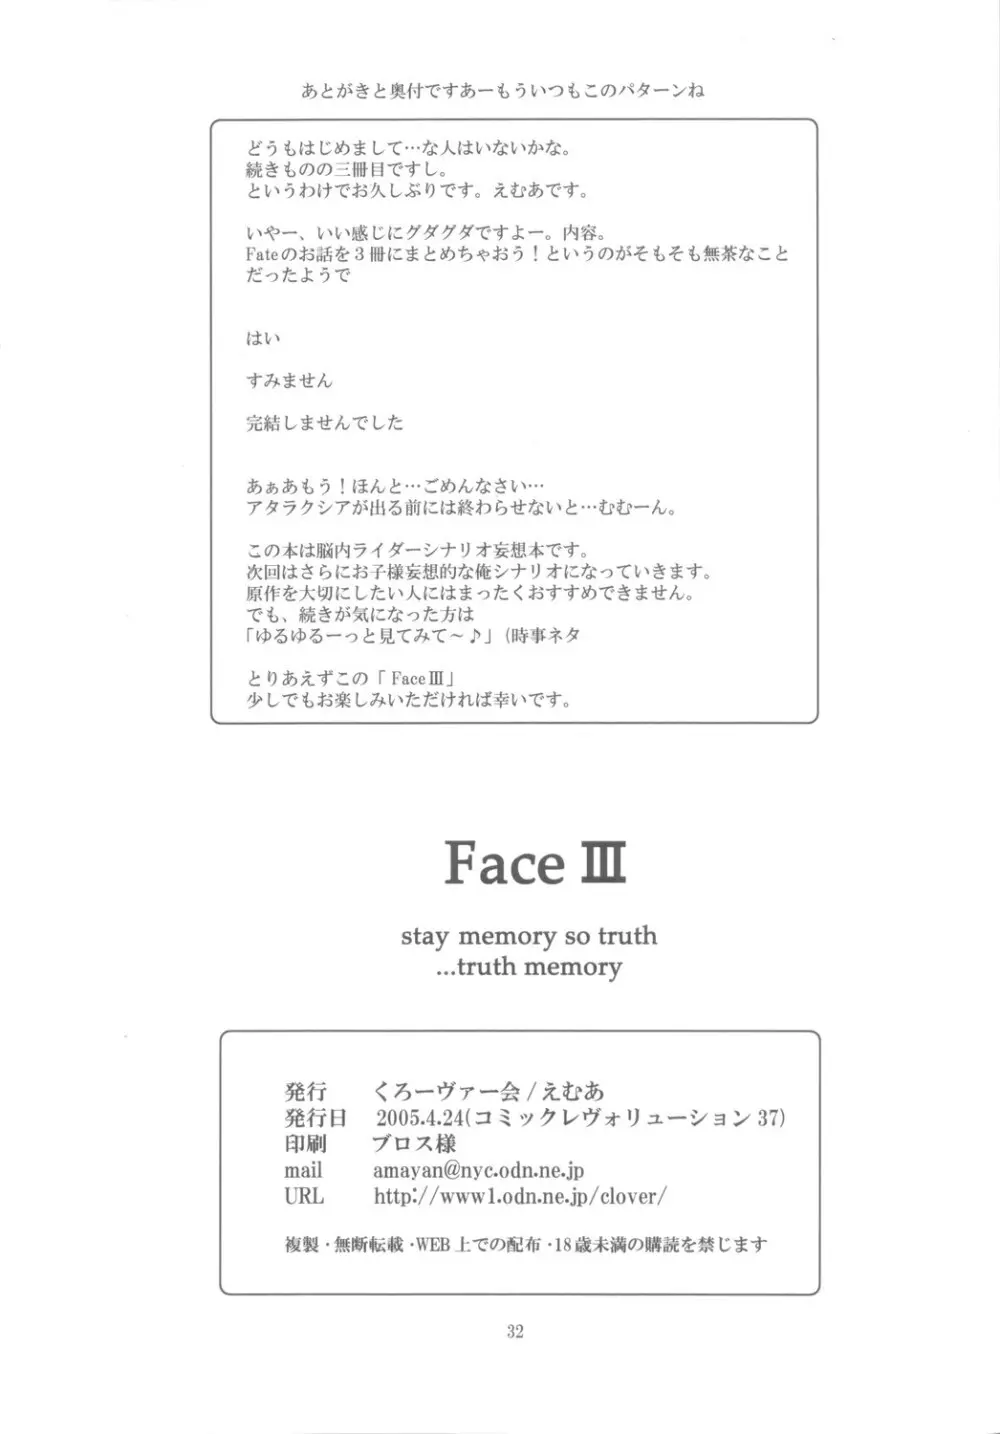 FaceIII stay memory so truth Page.31